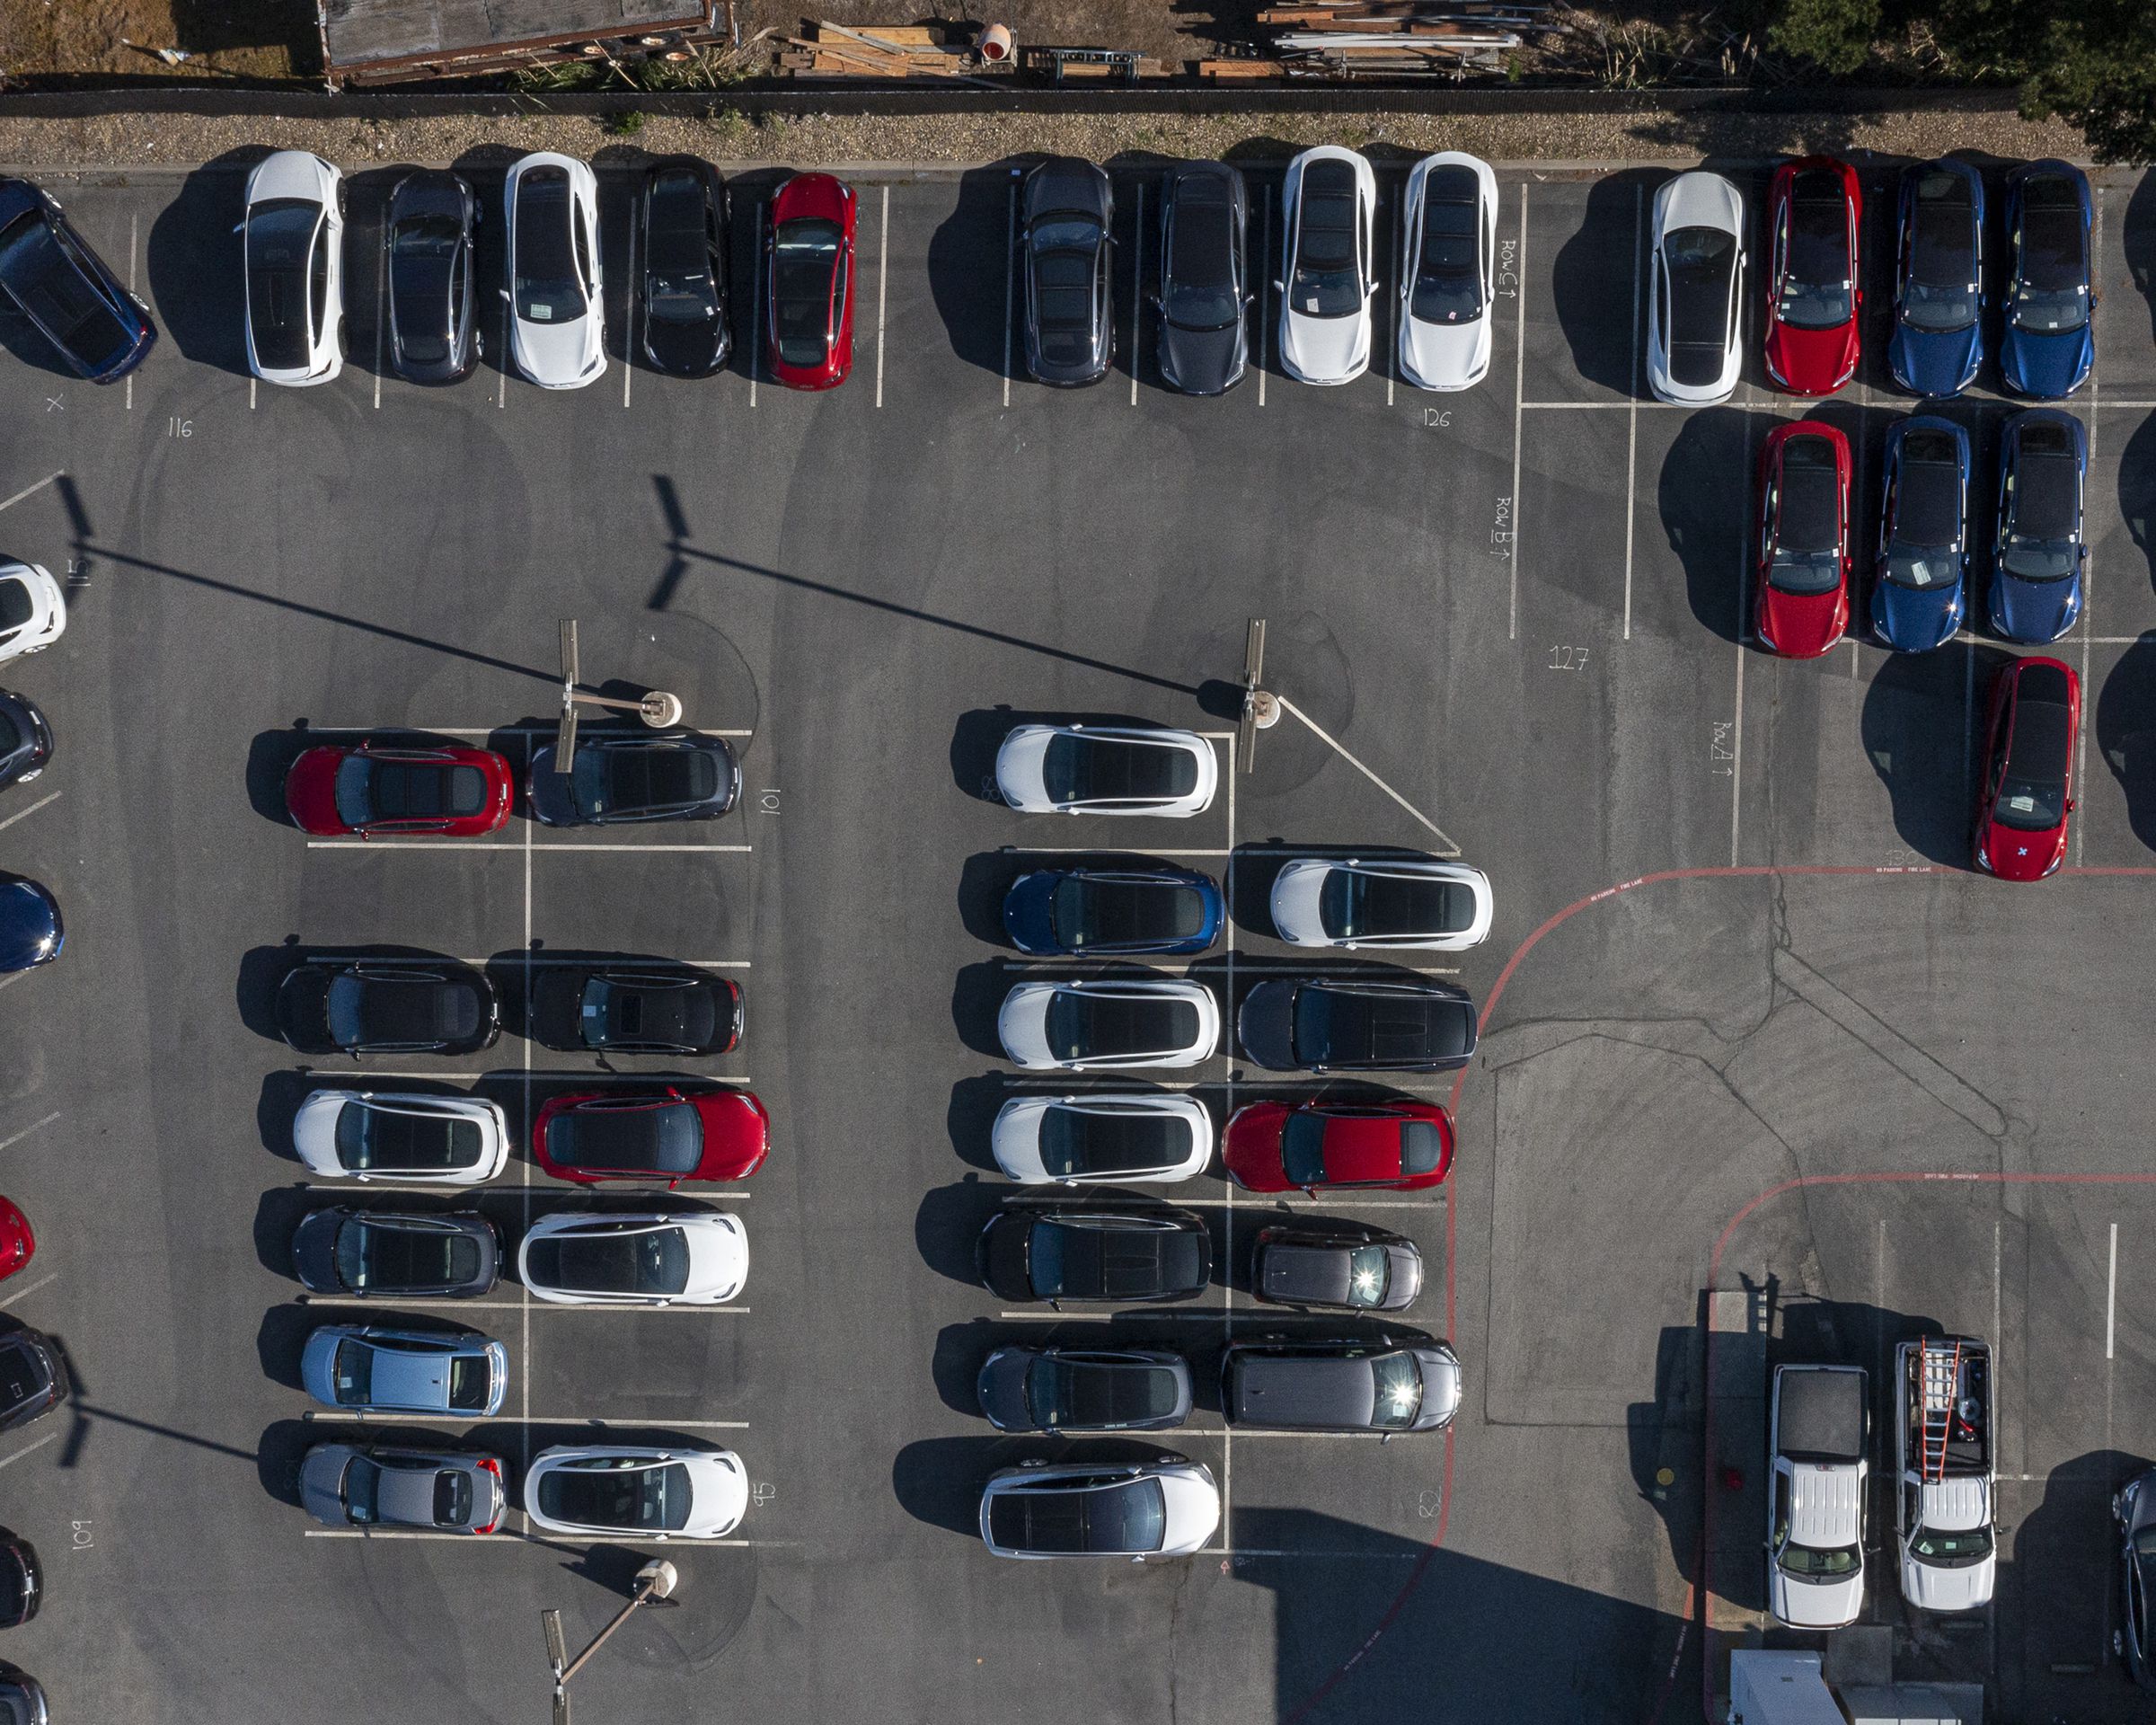 Tesla vehicles in a parking lot